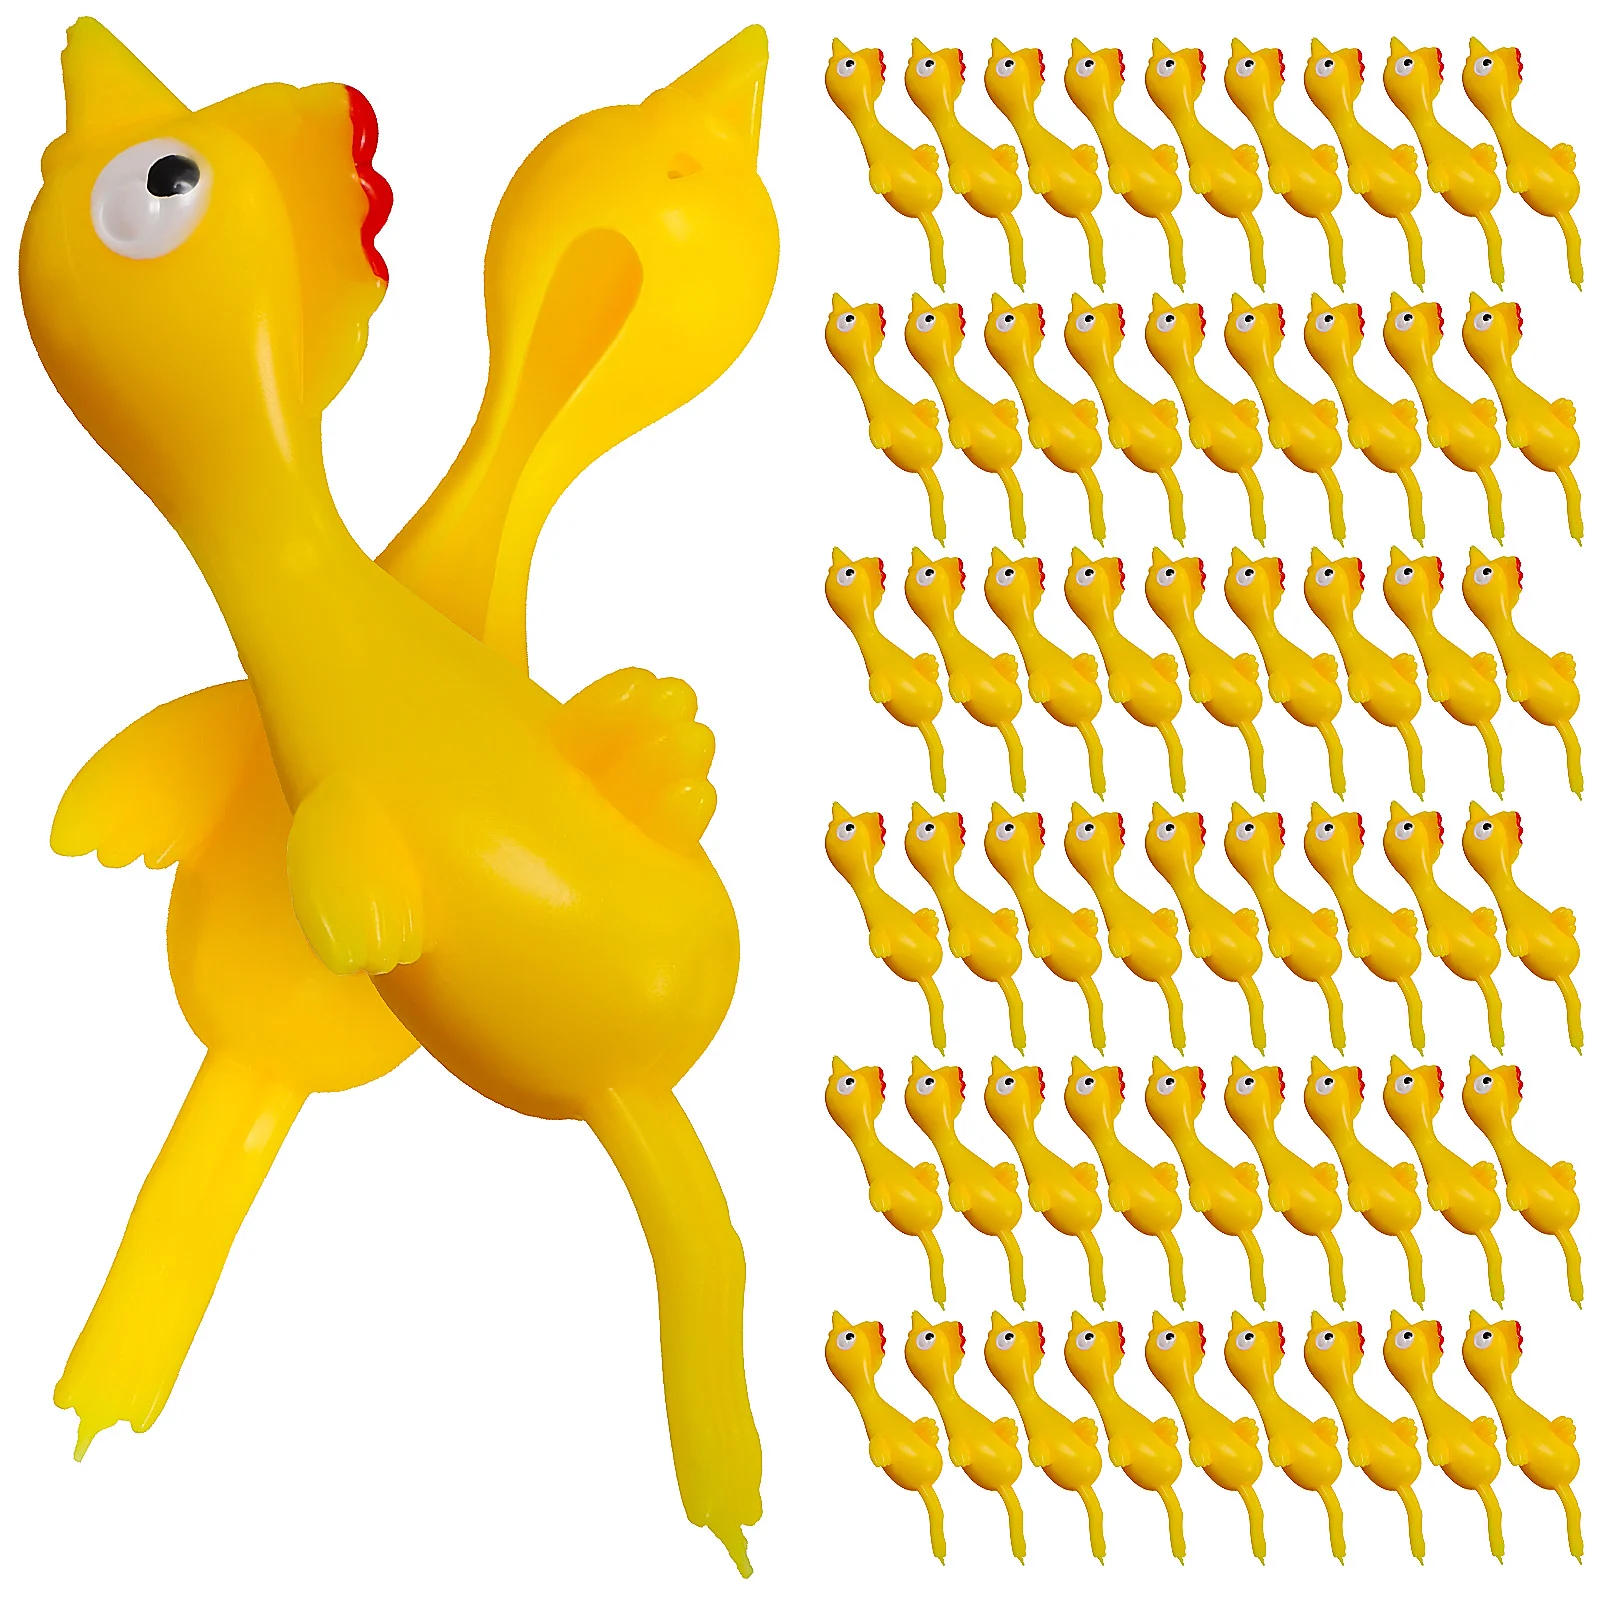 

60 Pcs Flick Chickens Rubber Stretchy Flying Chickens Fingers Stretchy Chicks